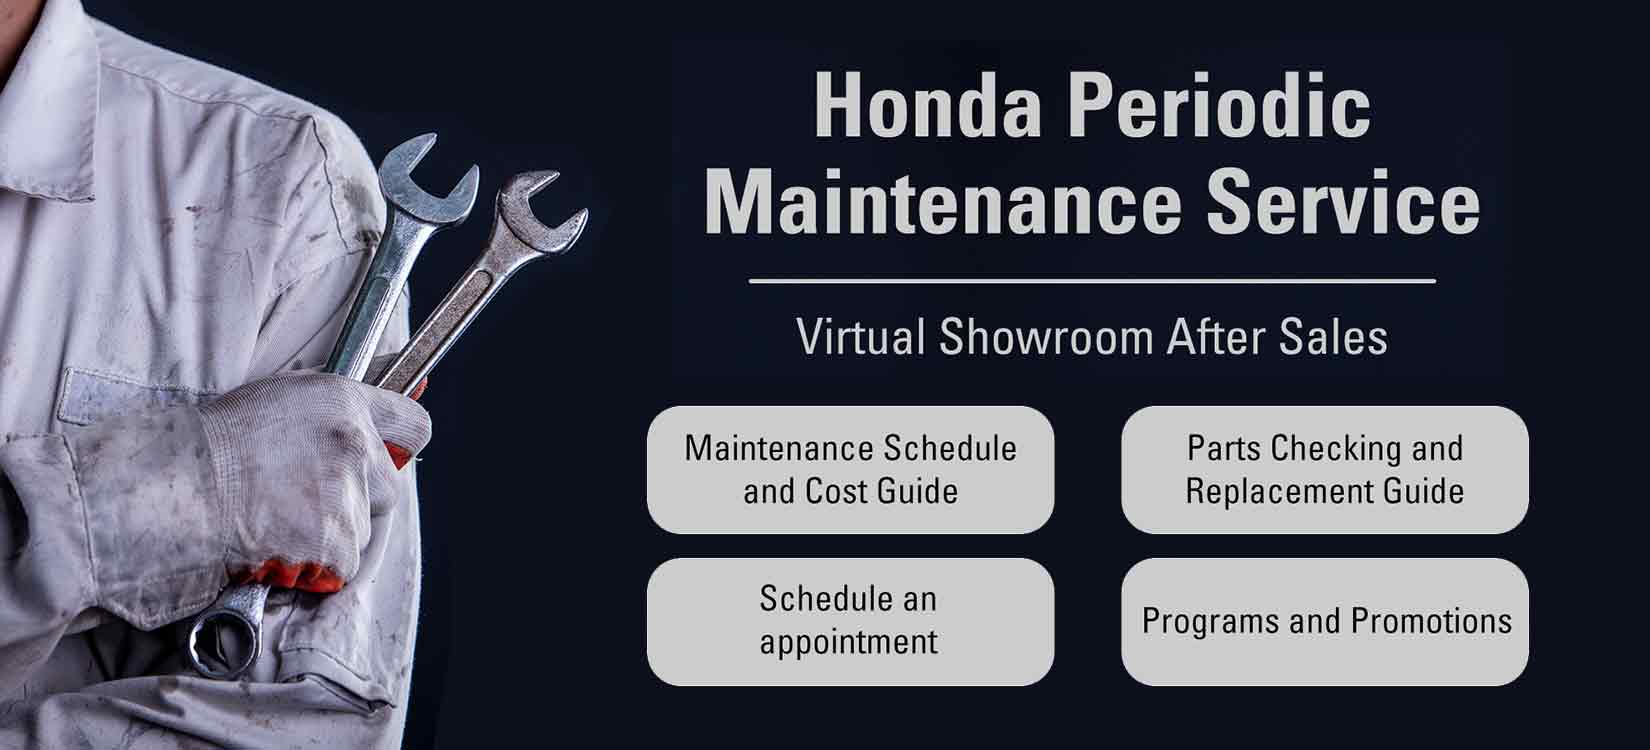 Know more about Honda’s Periodic Maintenance Service